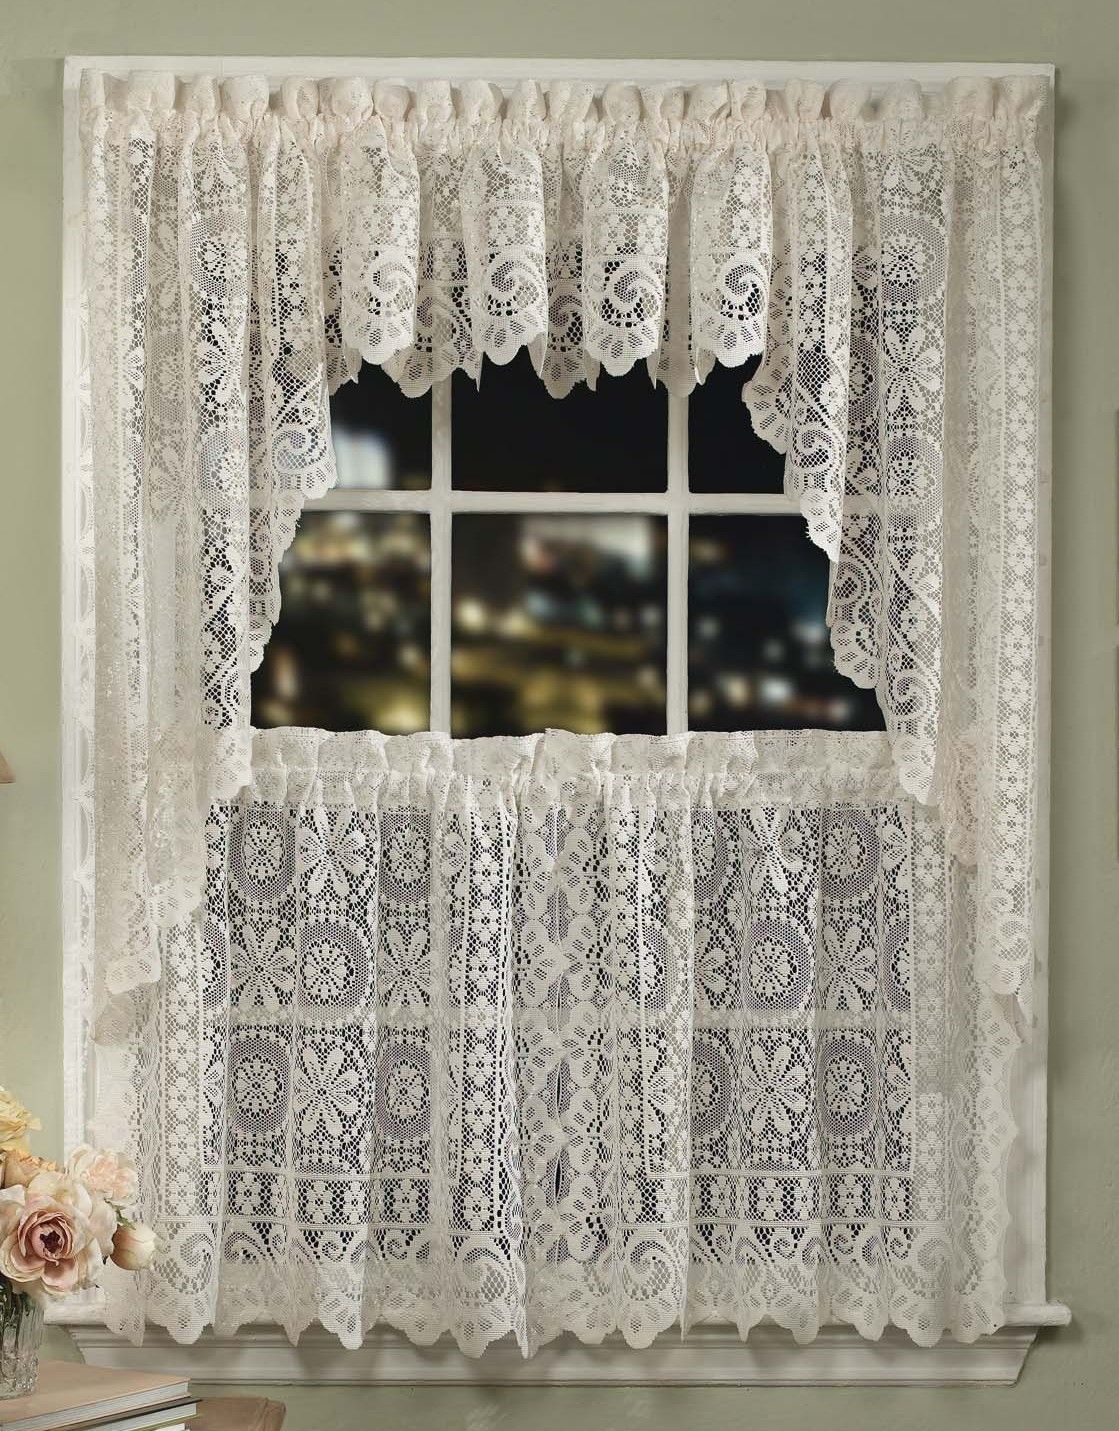 Lace Curtains 63 Pertaining To Lace Curtains (View 17 of 25)